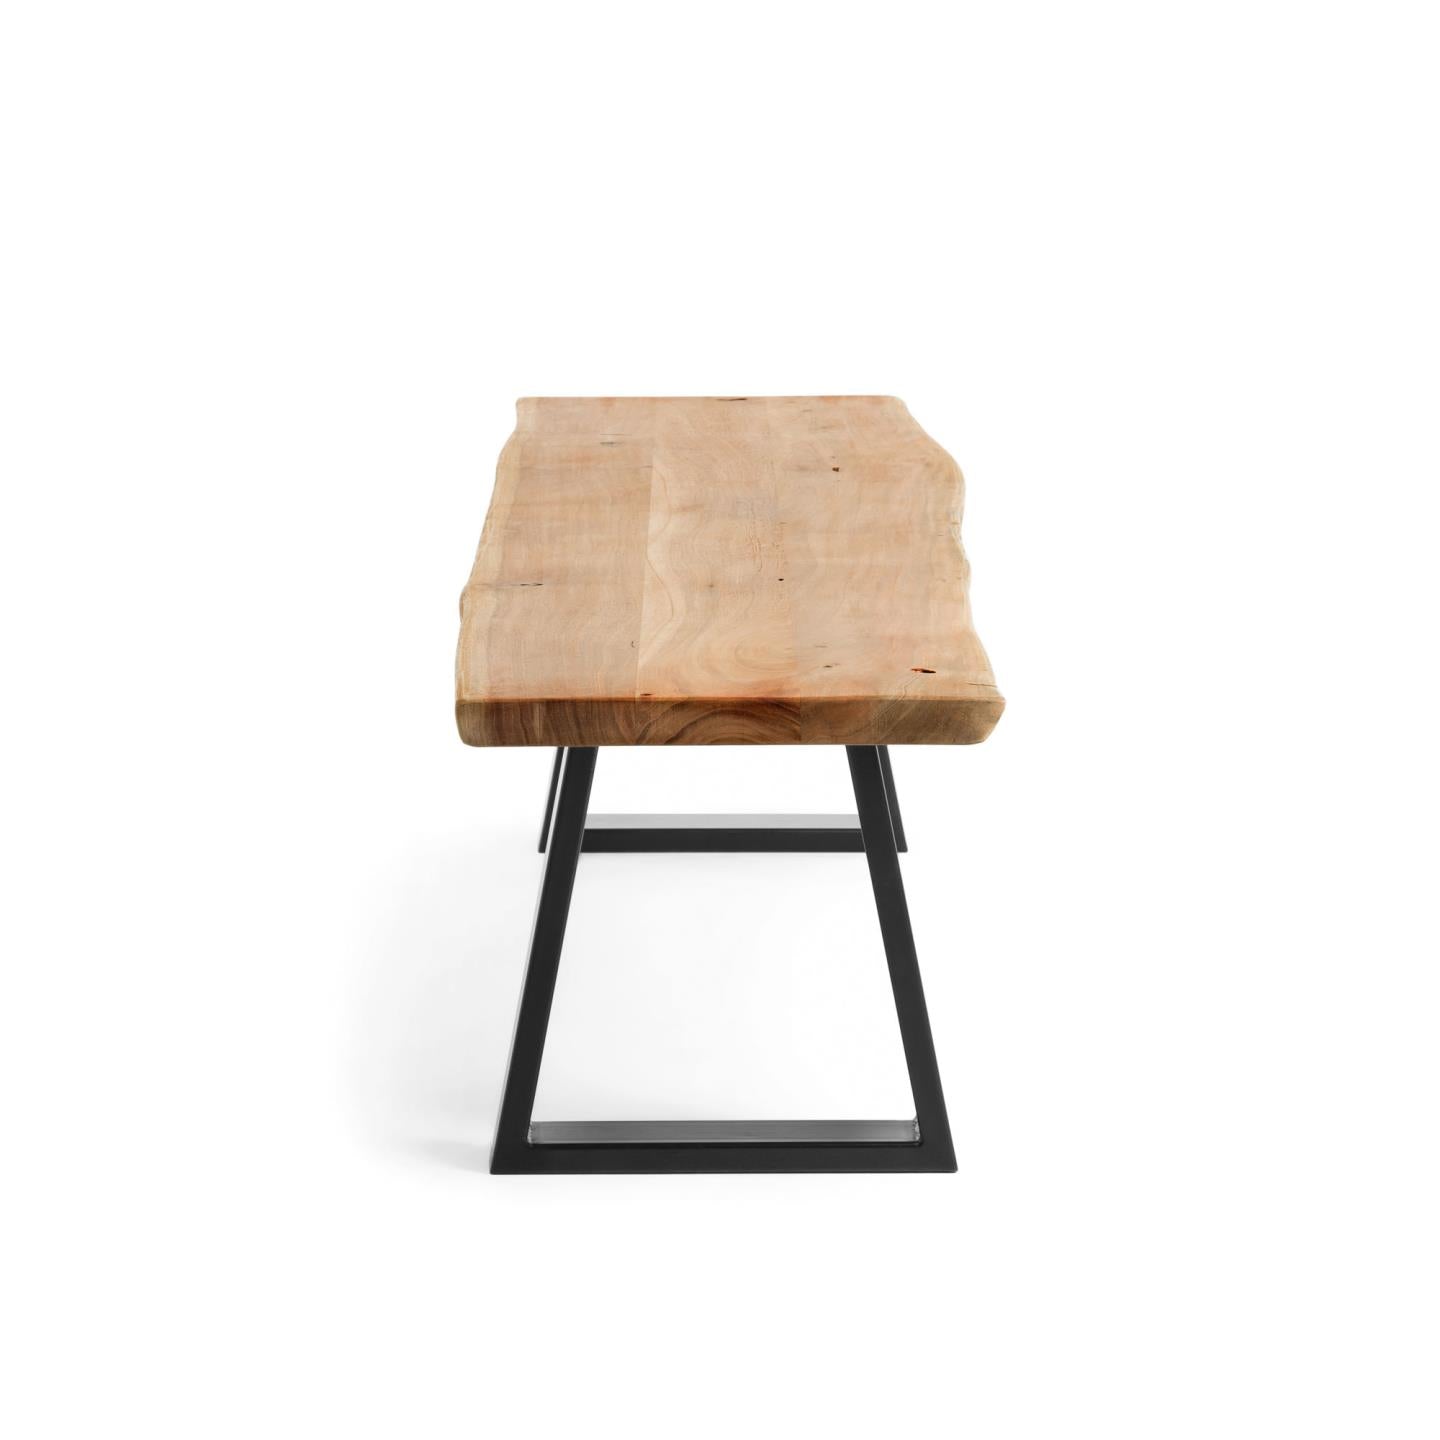 Alaia bench in solid acacia wood with black steel legs, 180 cm